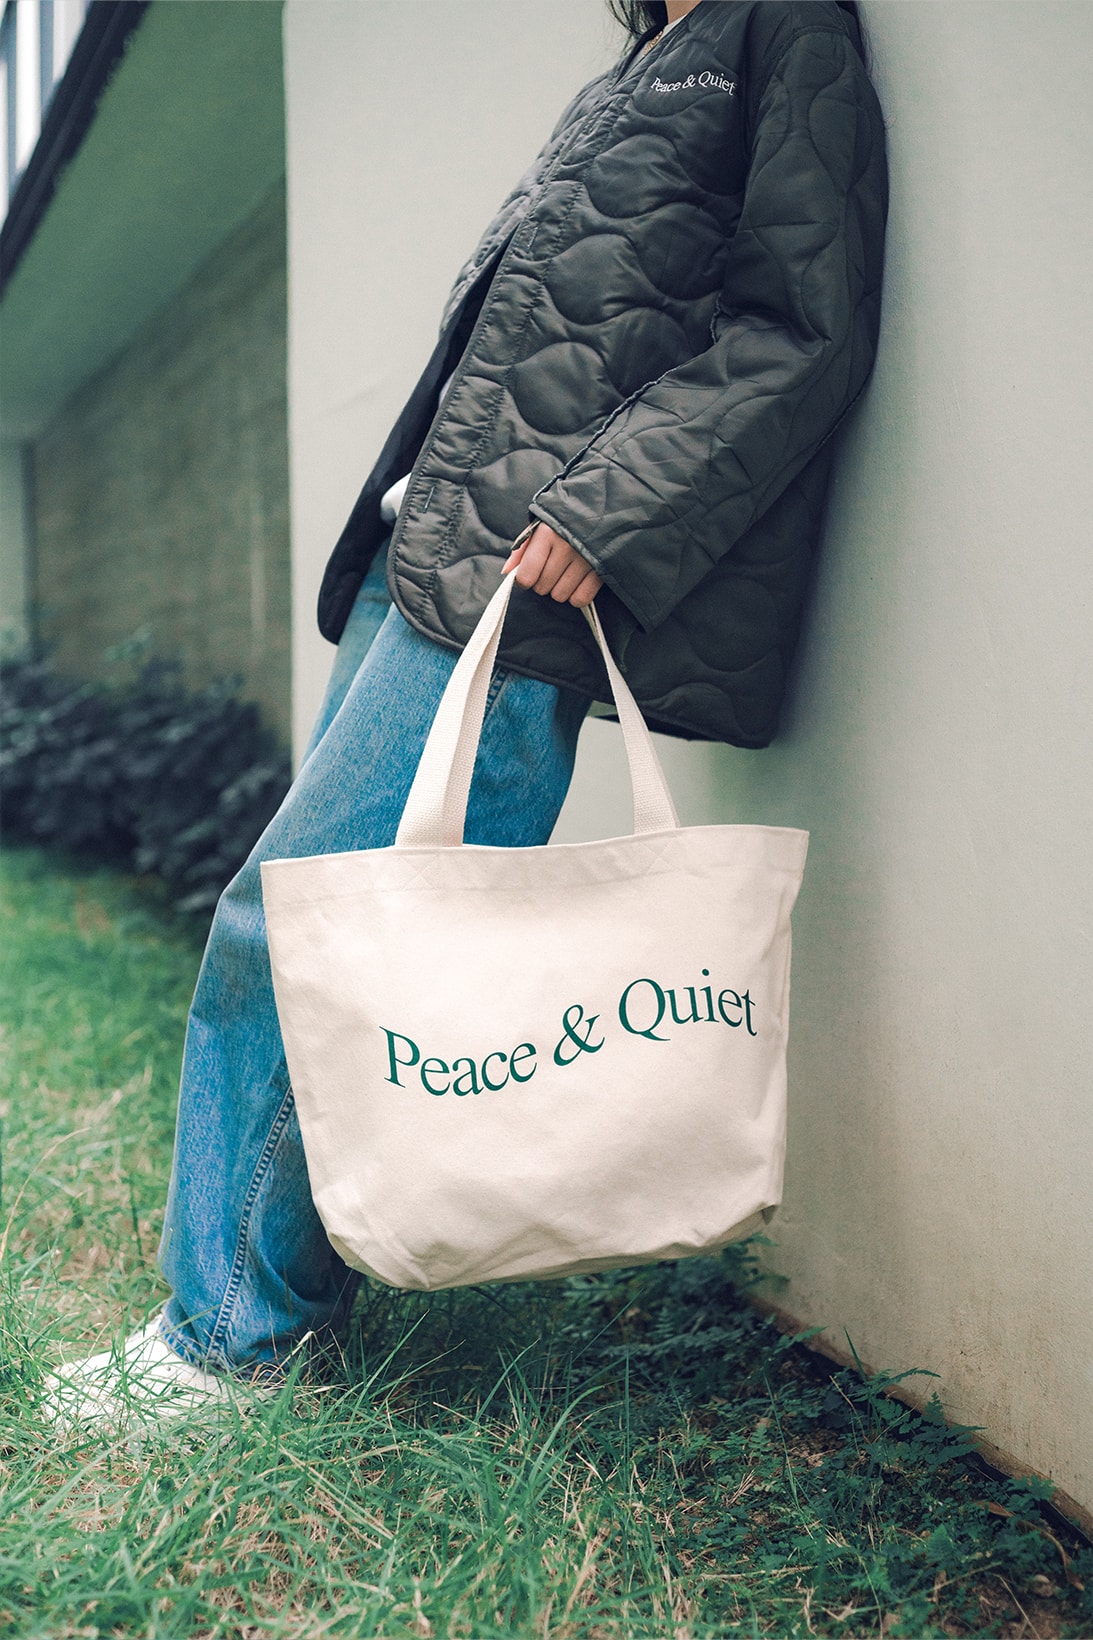 Museum of Peace & Quiet Essentials Unisex HBXWM Apparel Green Padded Jacket Accessories Tote Bag Details